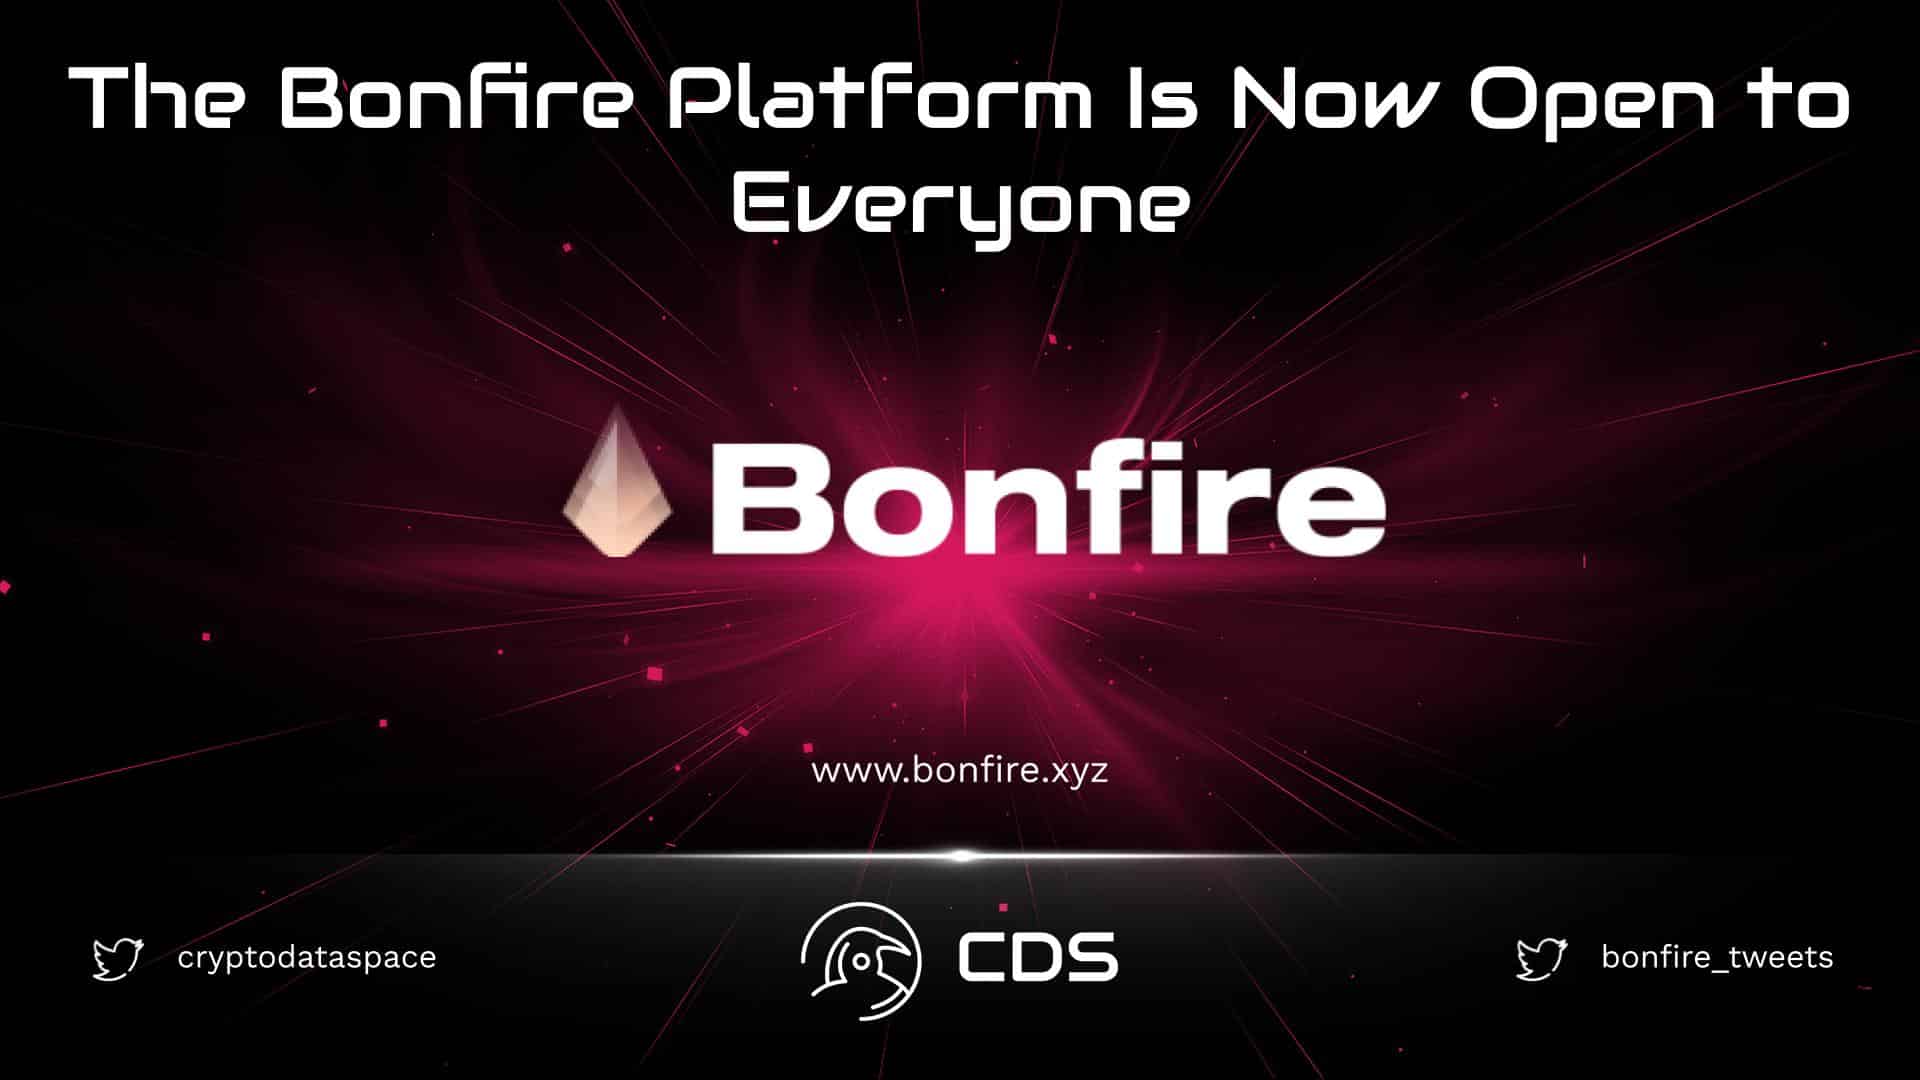 The Bonfire Platform Is Now Open to Everyone